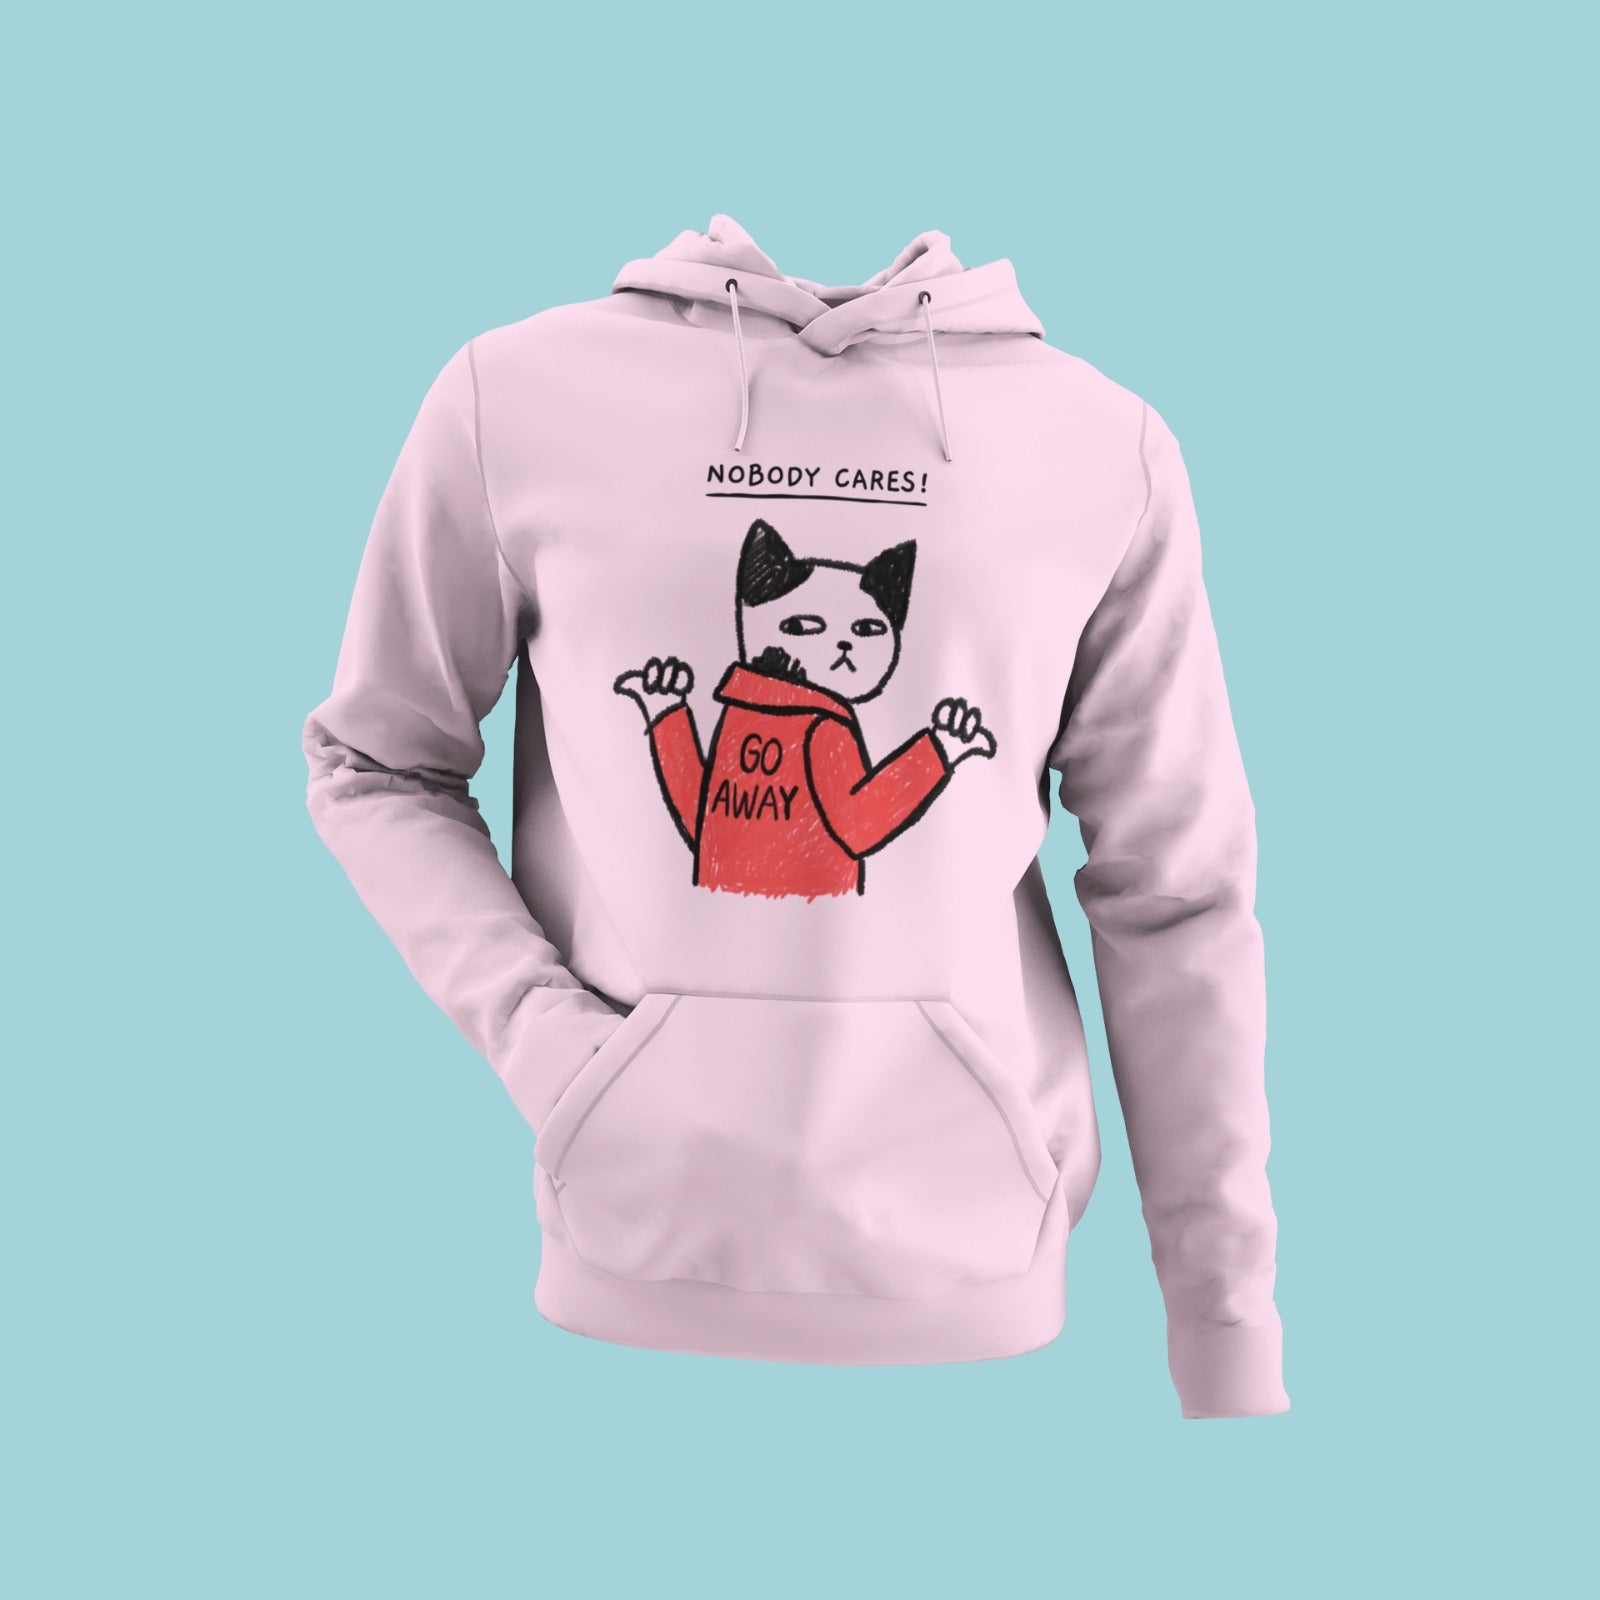  ChatGPT Show off your independent spirit and love for cats with this baby pink hoodie featuring the "nobody cares" title and a cat wearing a red jacket with "Go away" written on its back. The eye-catching design and comfortable material make it perfect for casual outings or a lazy day at home. Order now to add some feline flair to your wardrobe!